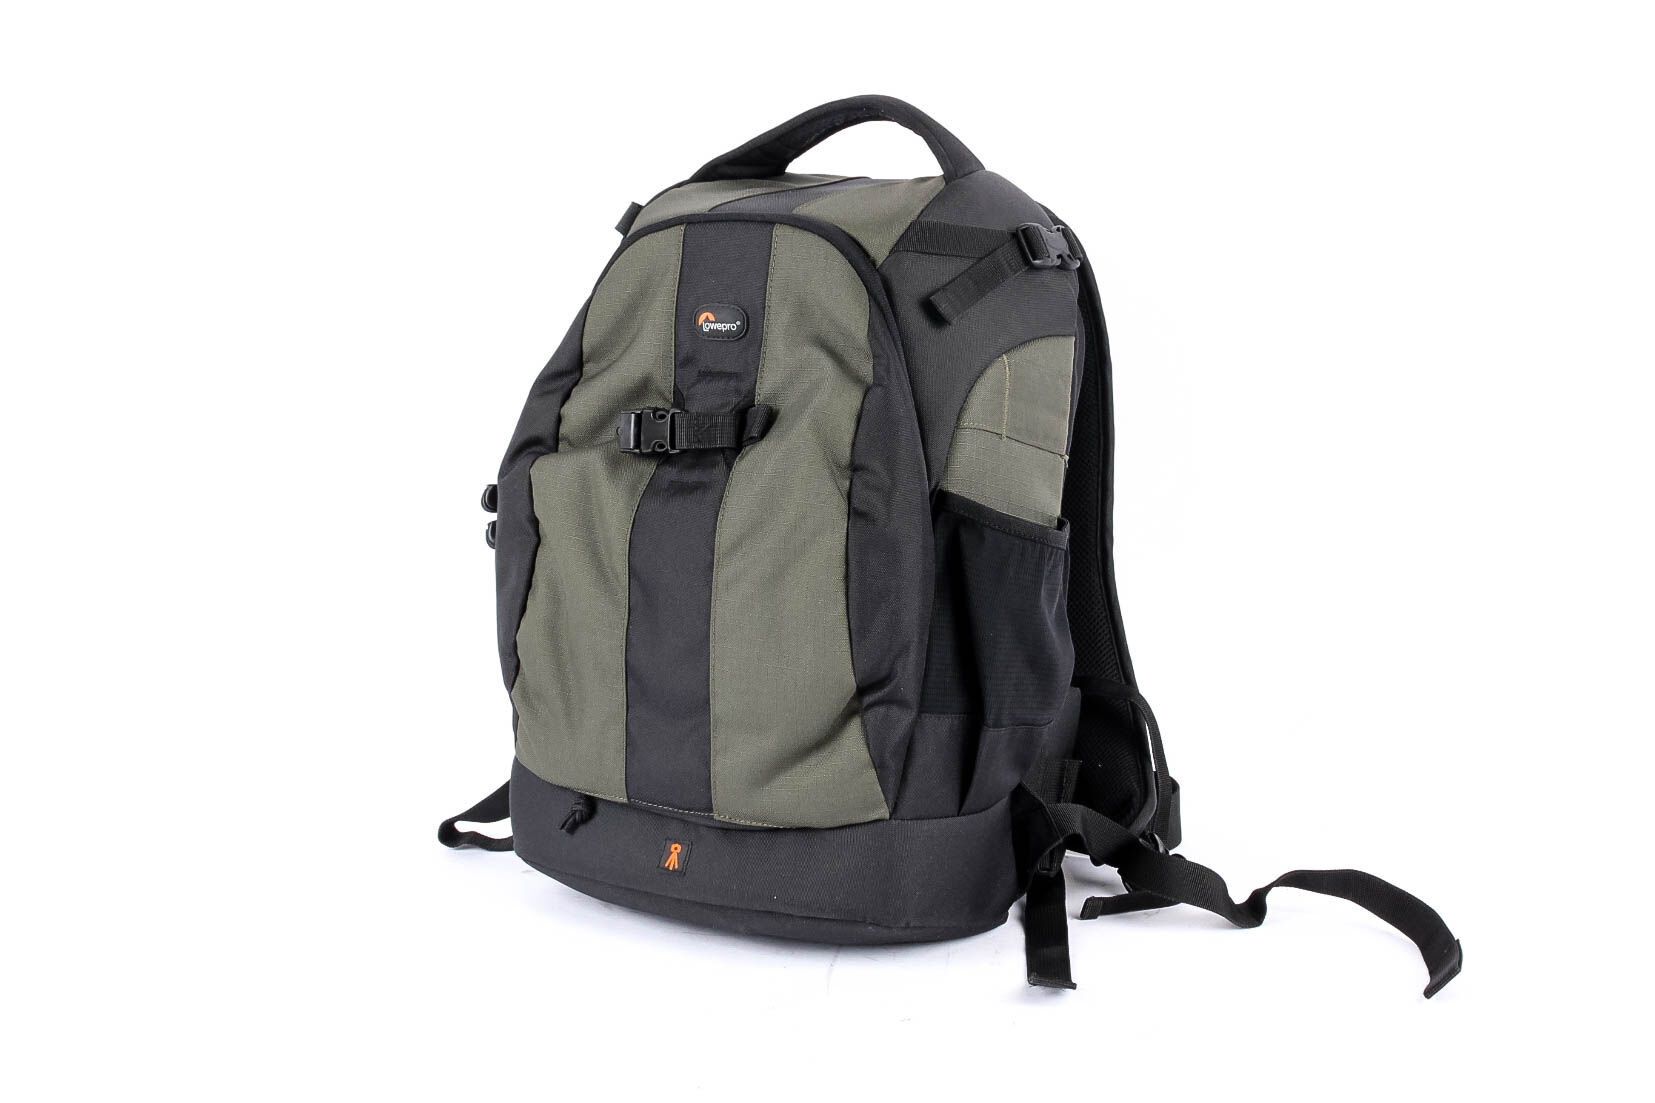 lowepro flipside 400 aw backpack (condition: excellent)